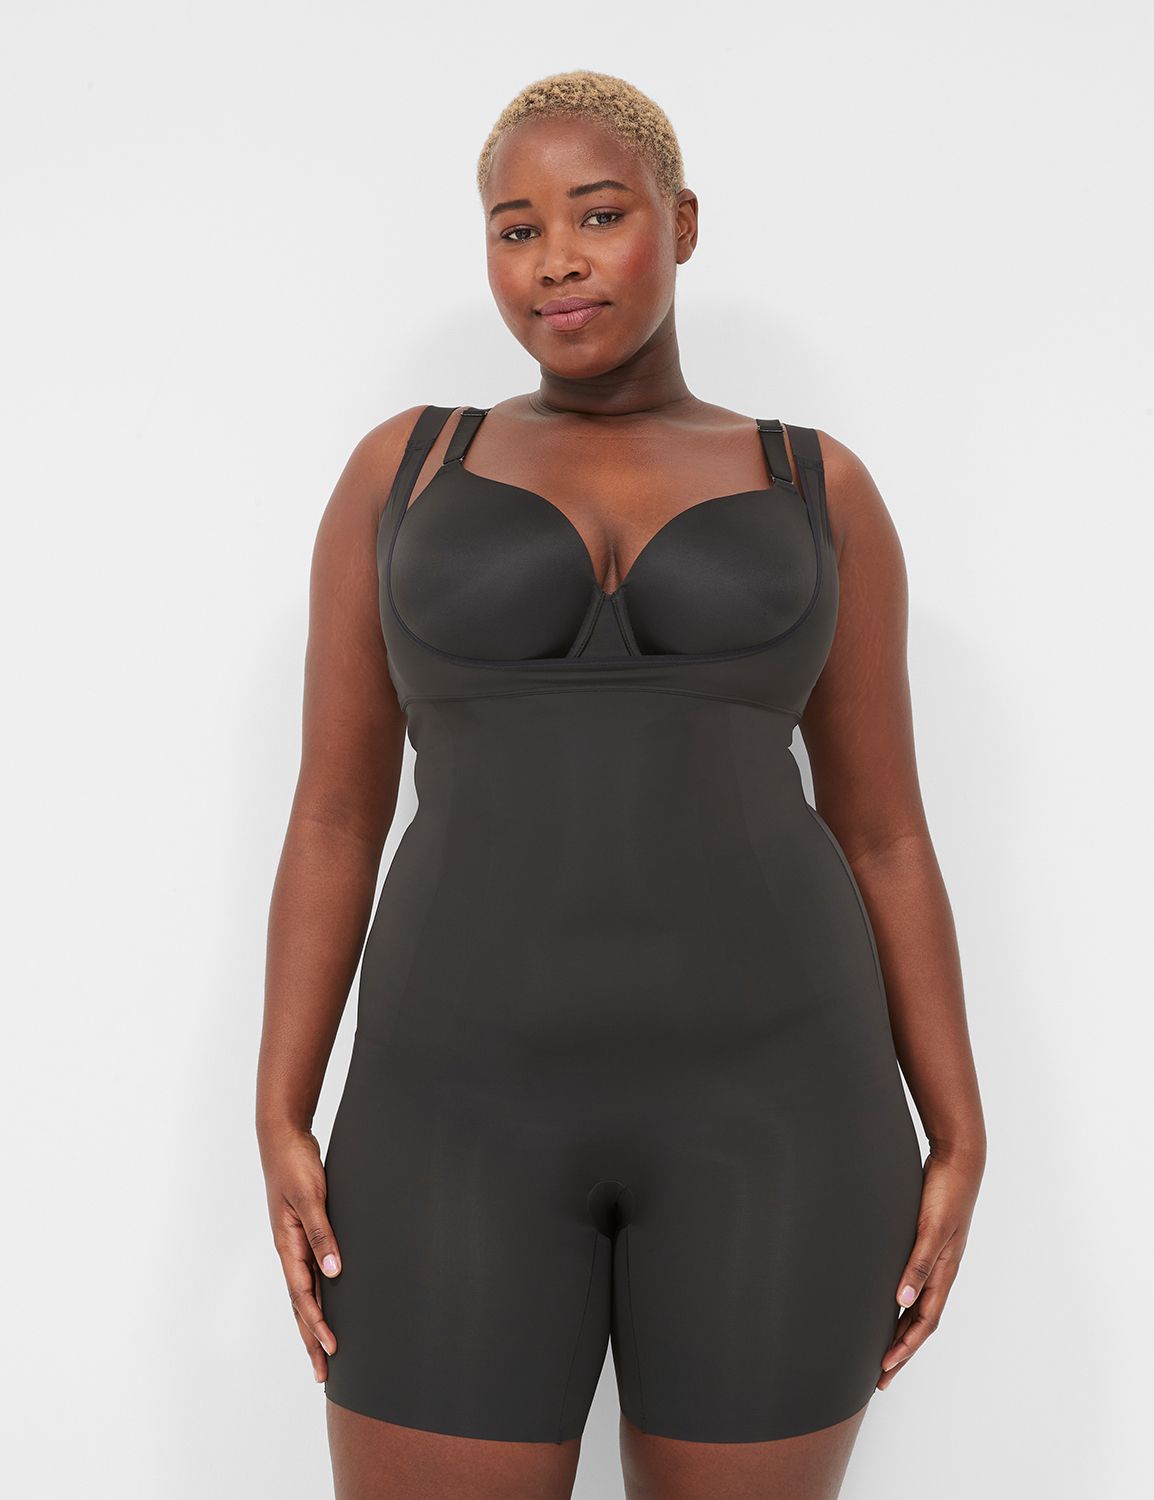 Shape By Cacique Lane Bryant Shaper Open-Bust Thigh Shapewear